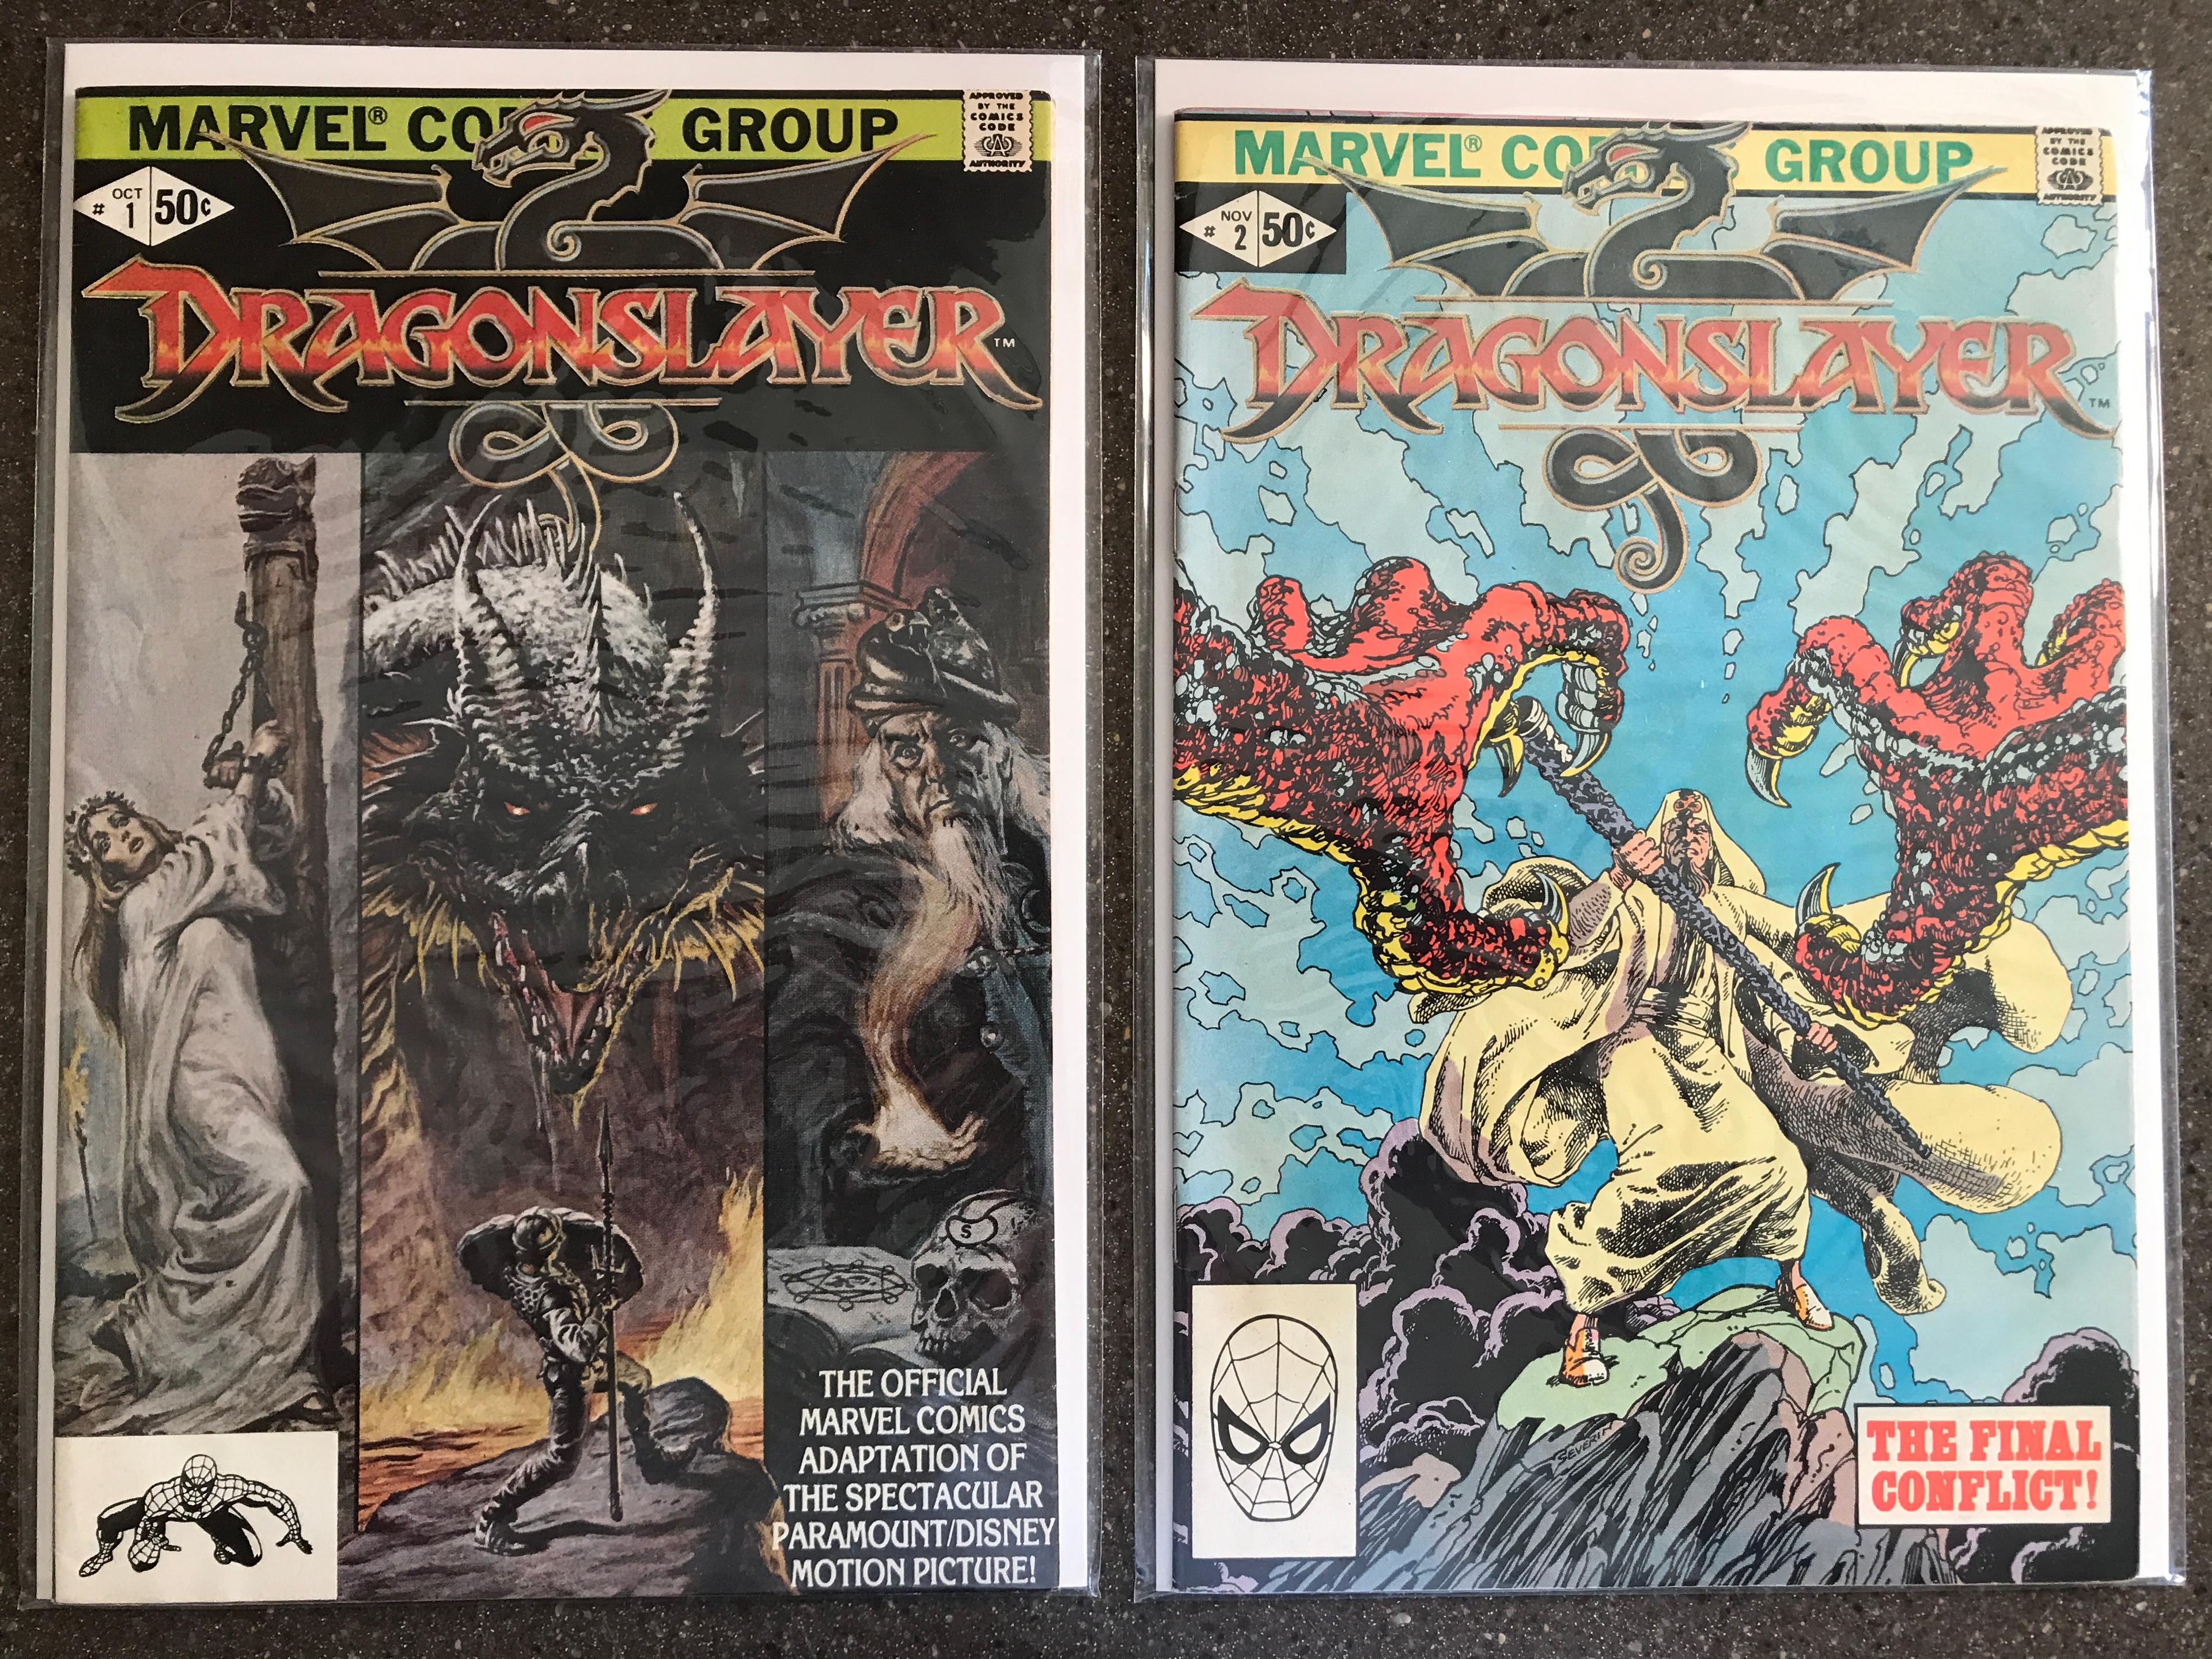 2 Issues of Dragonslayer Comic #1-2 Marvel 1981 Bronze Age Includes Key 1st Issue